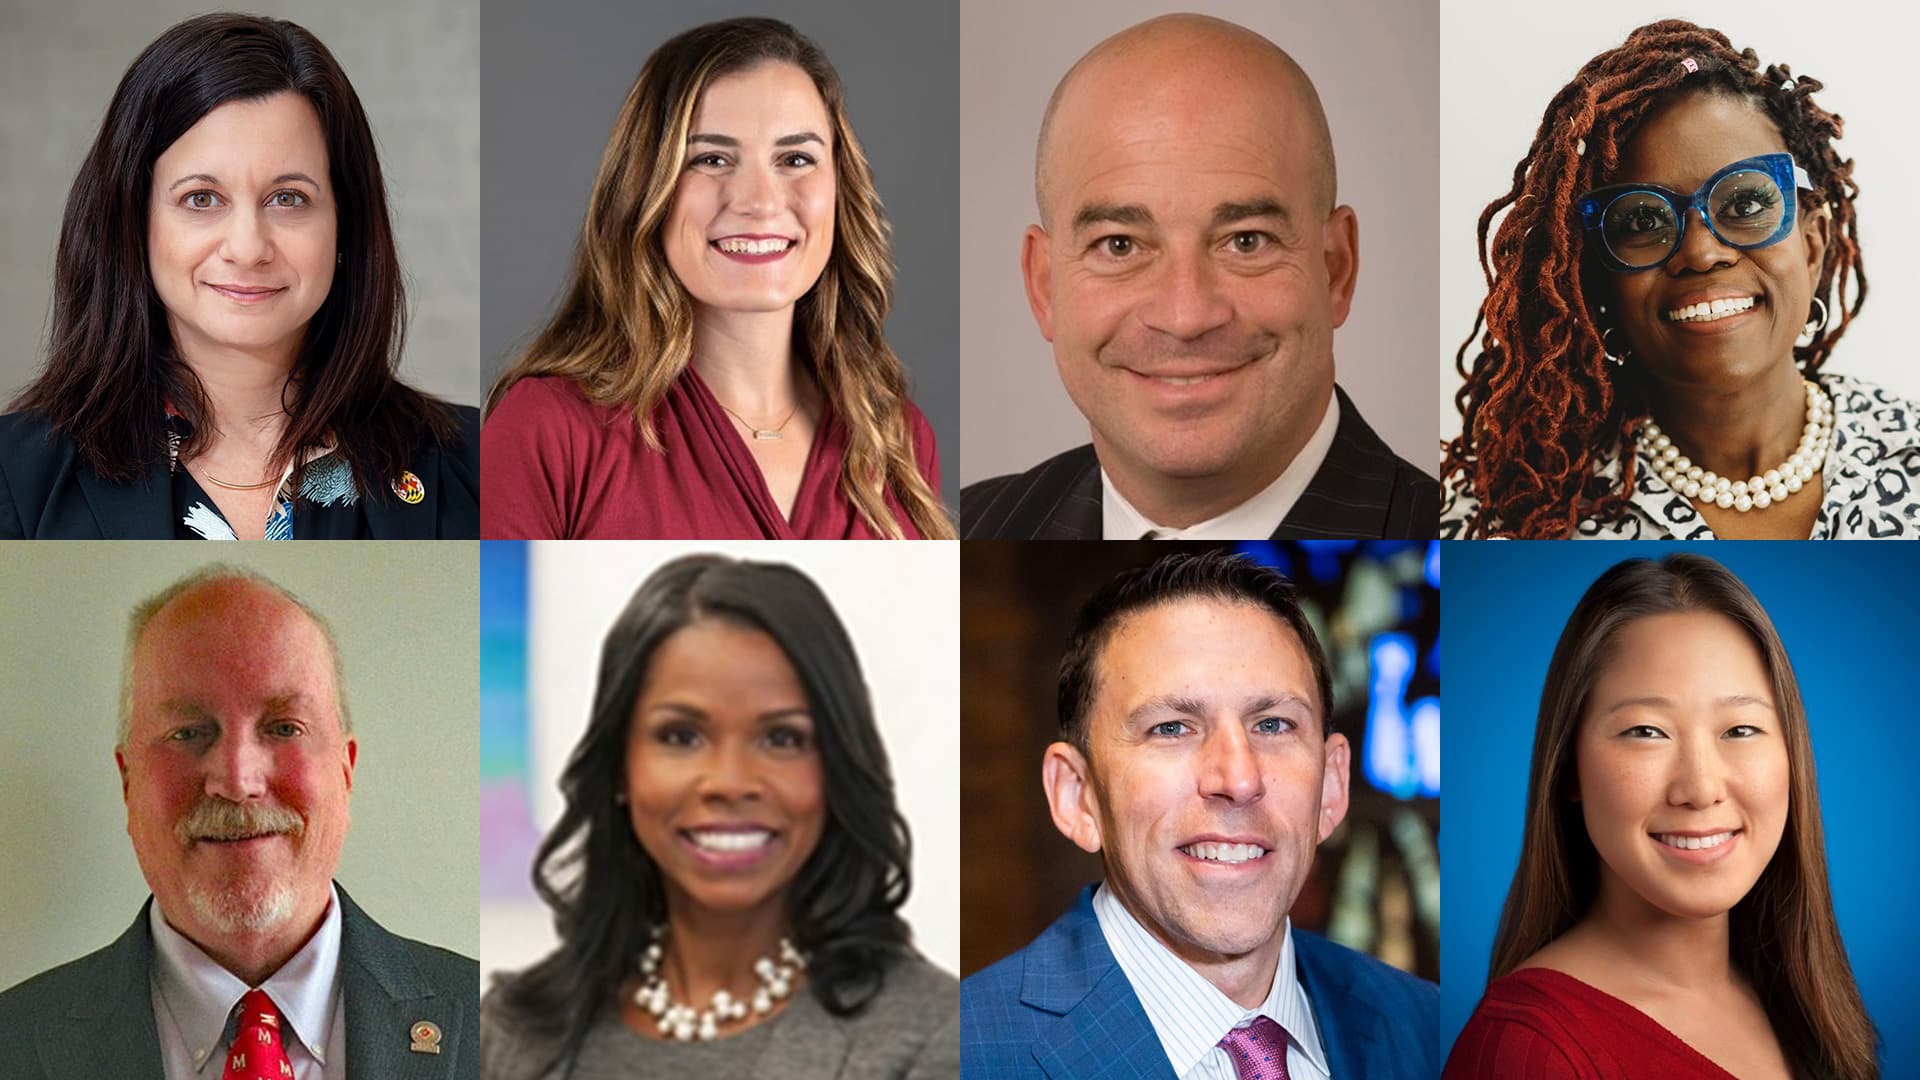 Headshots of the new members of the Alumni Association Board of Governors. From L-R starting in top-left corner: Laurie De Armond ’94, Maria Louzon Ball ’12, Phil Bass ’82, Laura Crandon ’91, Rocky Lopes ’80, Alethia Nancoo ’90, M.Ed. ’92, Peter Polow ’95, Amy Yip ’04.